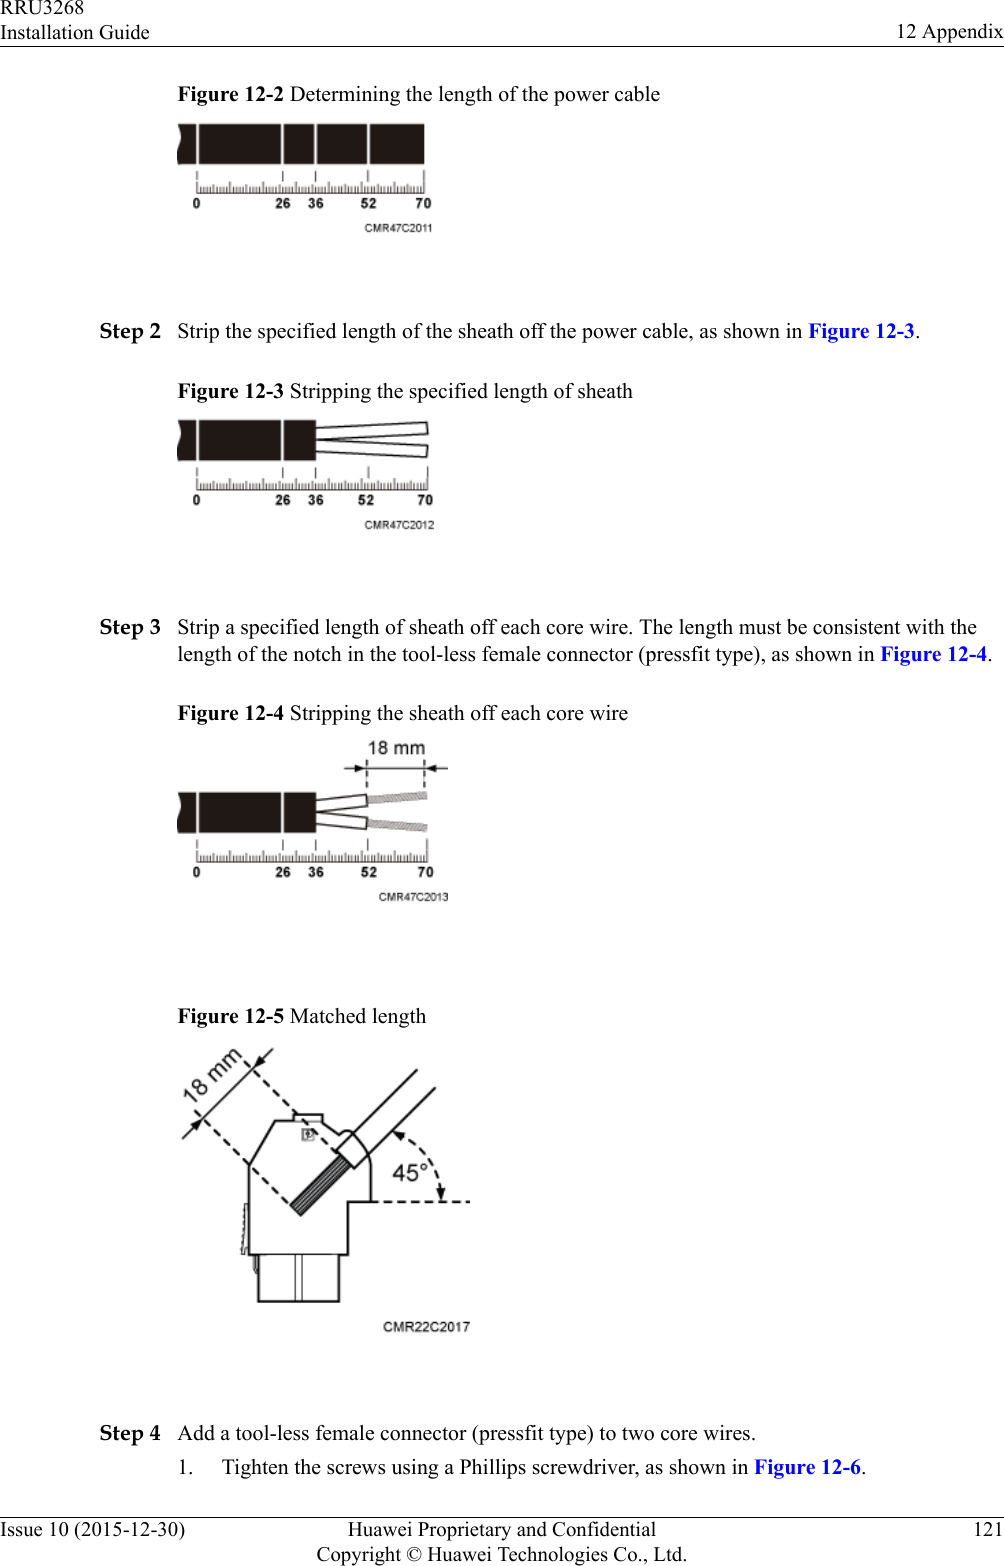 Figure 12-2 Determining the length of the power cable Step 2 Strip the specified length of the sheath off the power cable, as shown in Figure 12-3.Figure 12-3 Stripping the specified length of sheath Step 3 Strip a specified length of sheath off each core wire. The length must be consistent with thelength of the notch in the tool-less female connector (pressfit type), as shown in Figure 12-4.Figure 12-4 Stripping the sheath off each core wire Figure 12-5 Matched length Step 4 Add a tool-less female connector (pressfit type) to two core wires.1. Tighten the screws using a Phillips screwdriver, as shown in Figure 12-6.RRU3268Installation Guide 12 AppendixIssue 10 (2015-12-30) Huawei Proprietary and ConfidentialCopyright © Huawei Technologies Co., Ltd.121